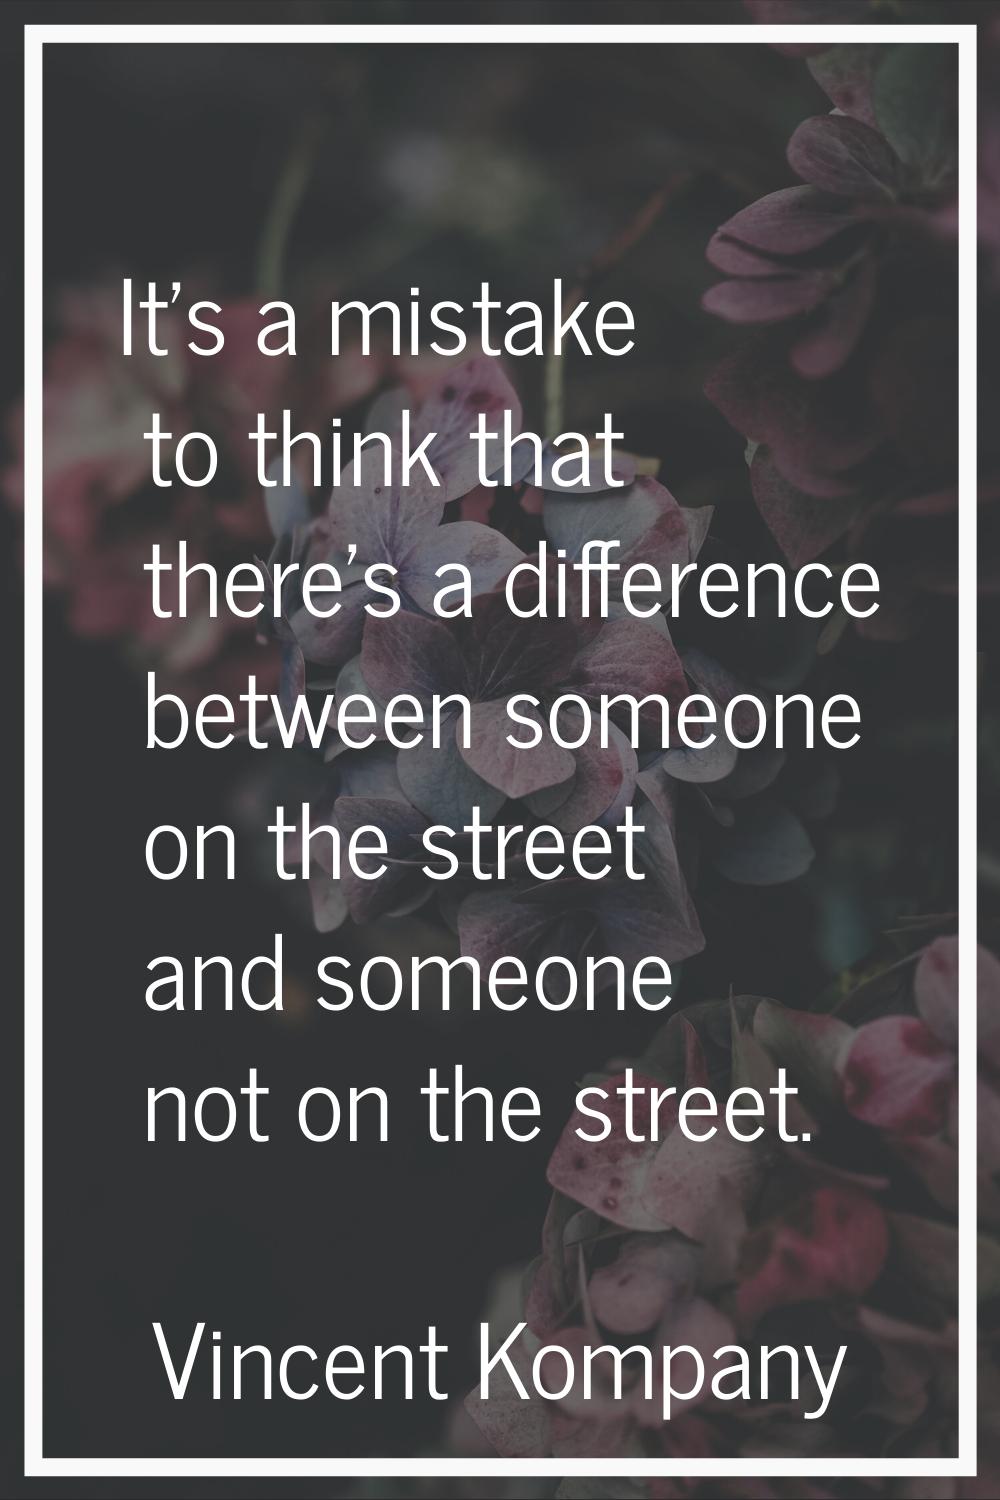 It's a mistake to think that there's a difference between someone on the street and someone not on 